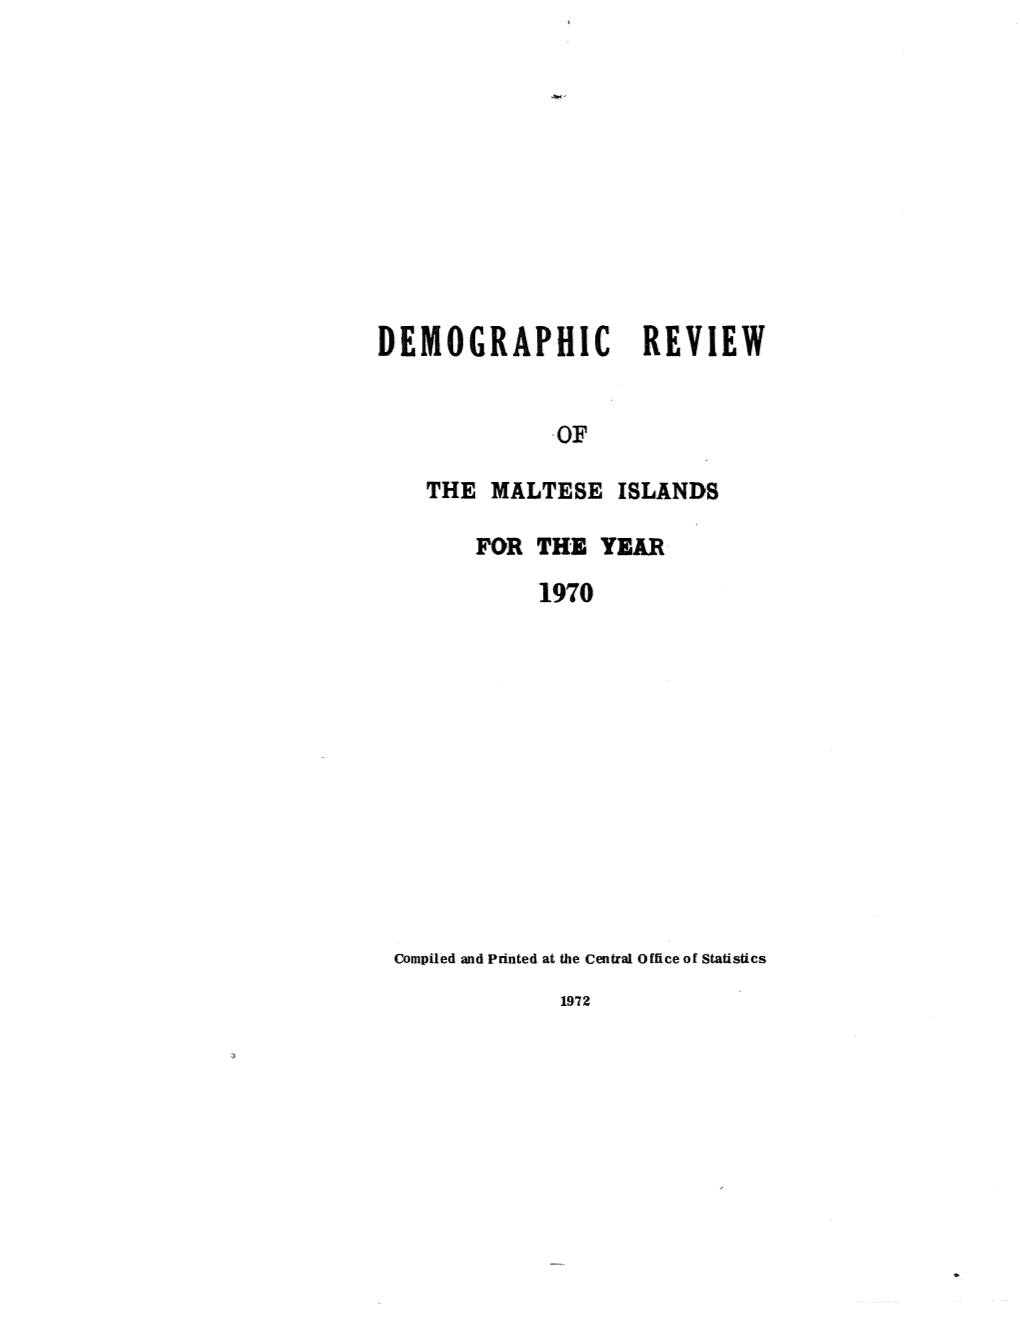 Demographic Review of the Maltese Islands for the Year 1970.PDF